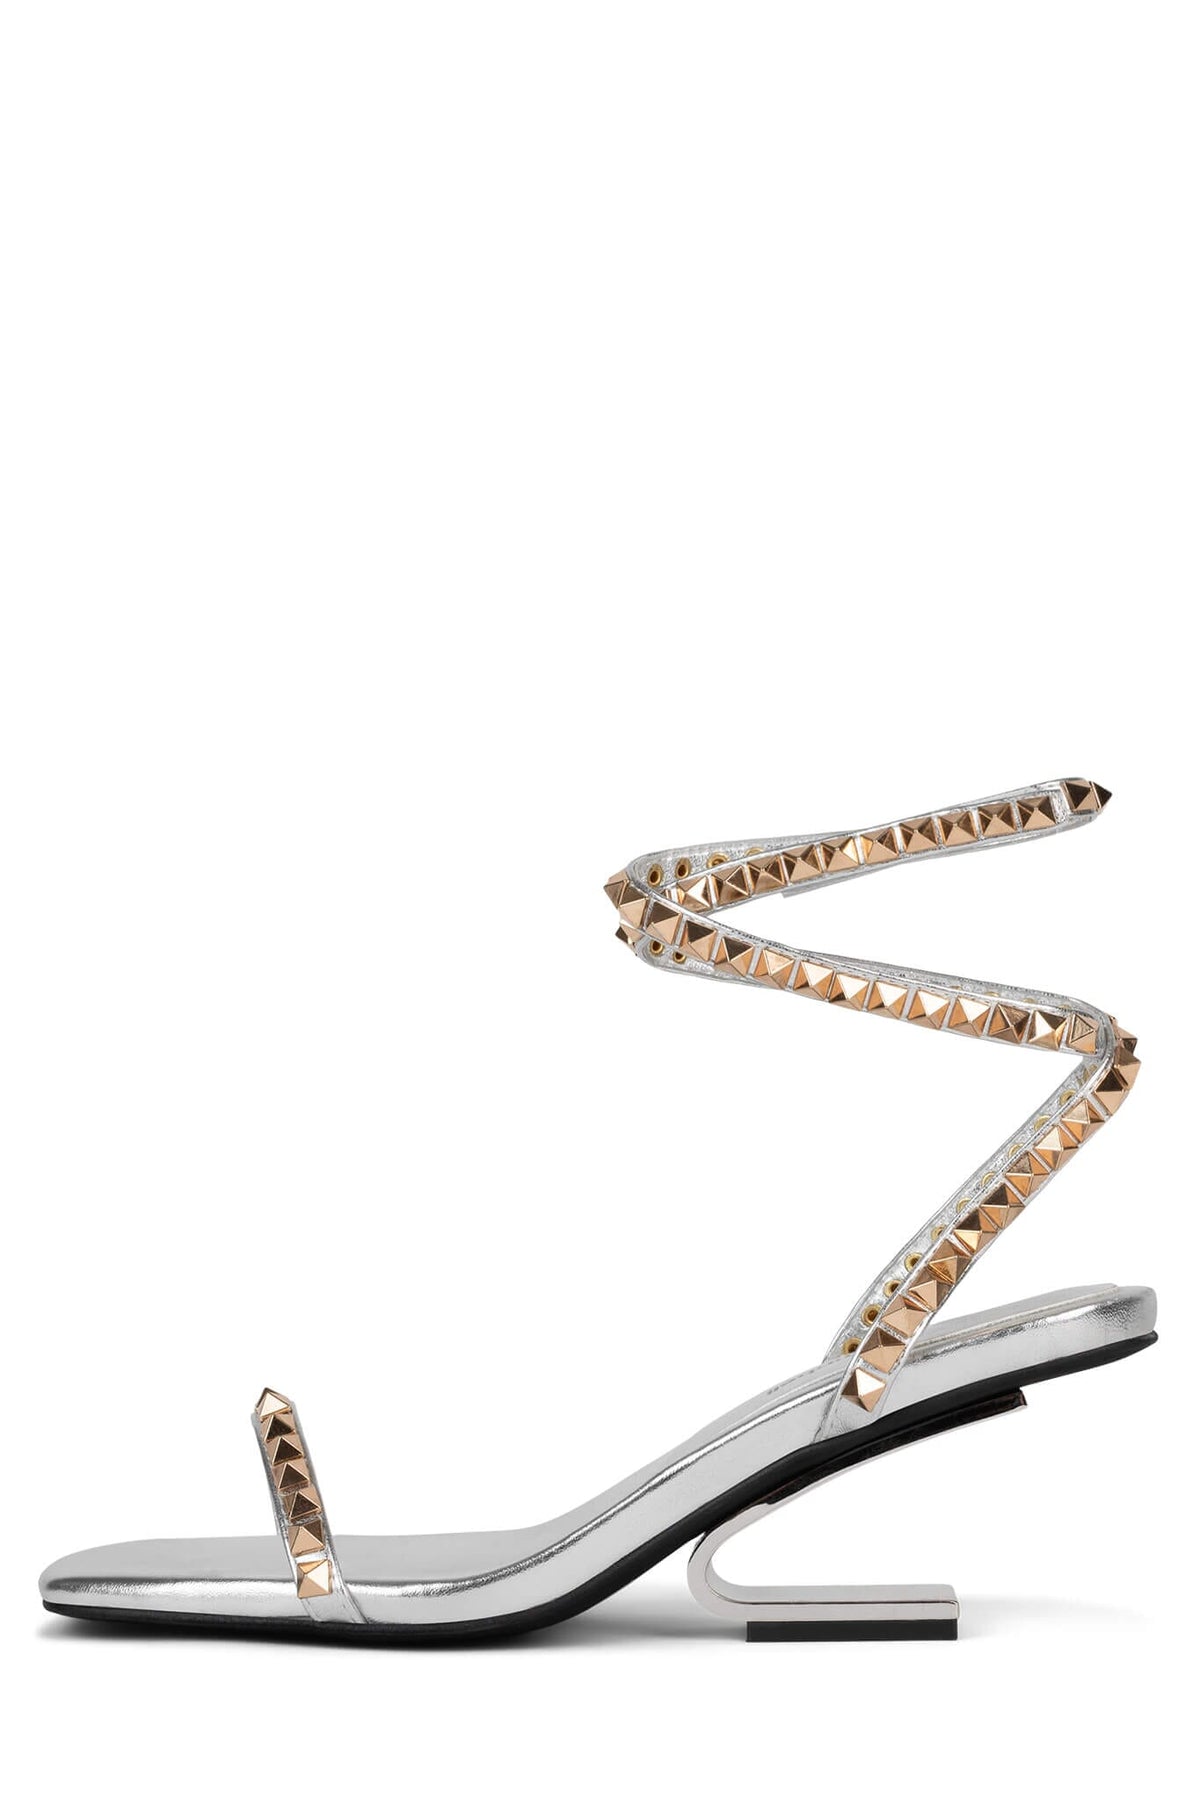 LUXOR-LB Jeffrey Campbell Studded Strappy Sandal Silver Gold Combo